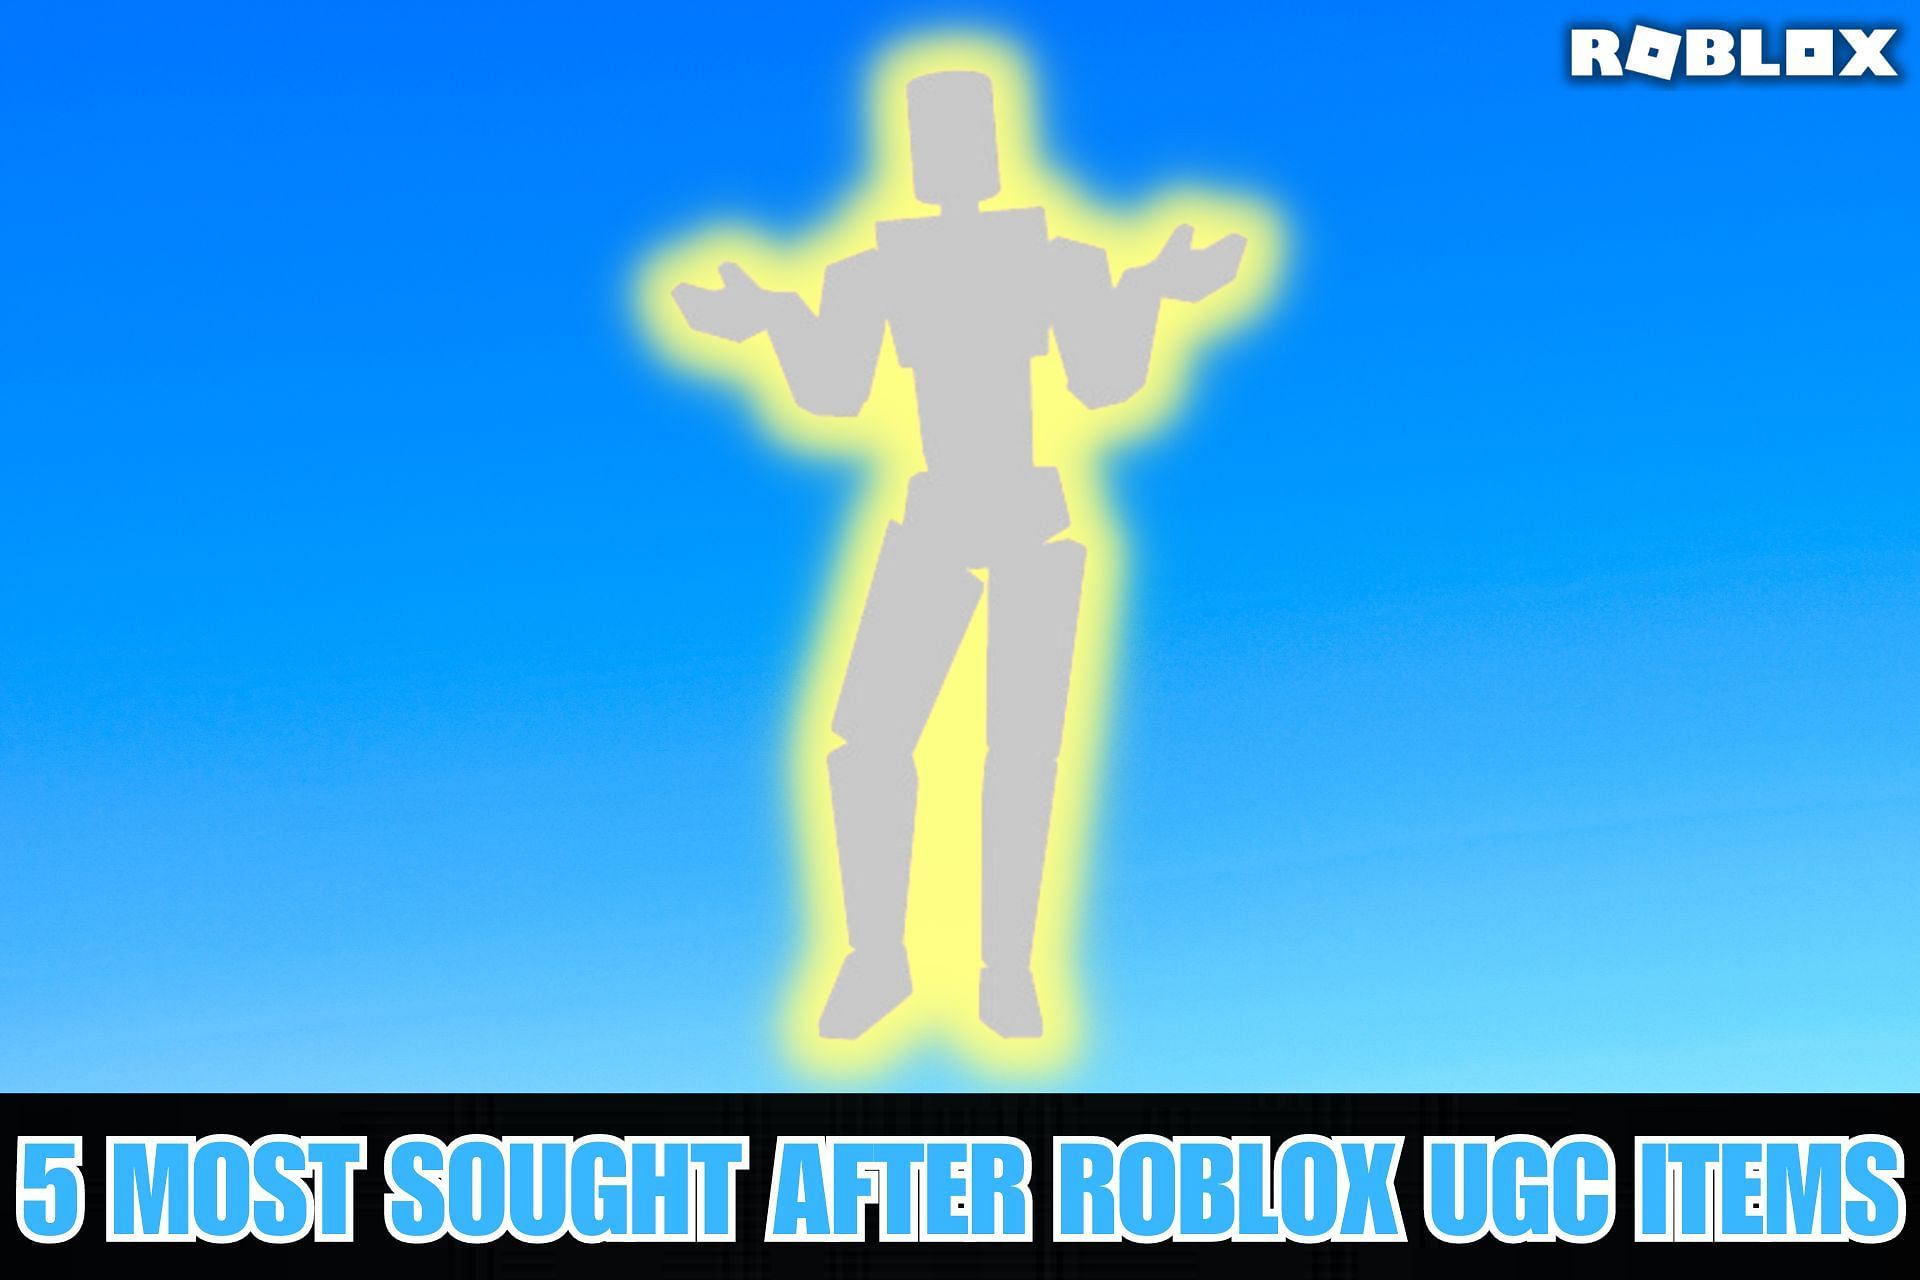 How to MAKE Avatar Shop items in Roblox - UGC Community Creations